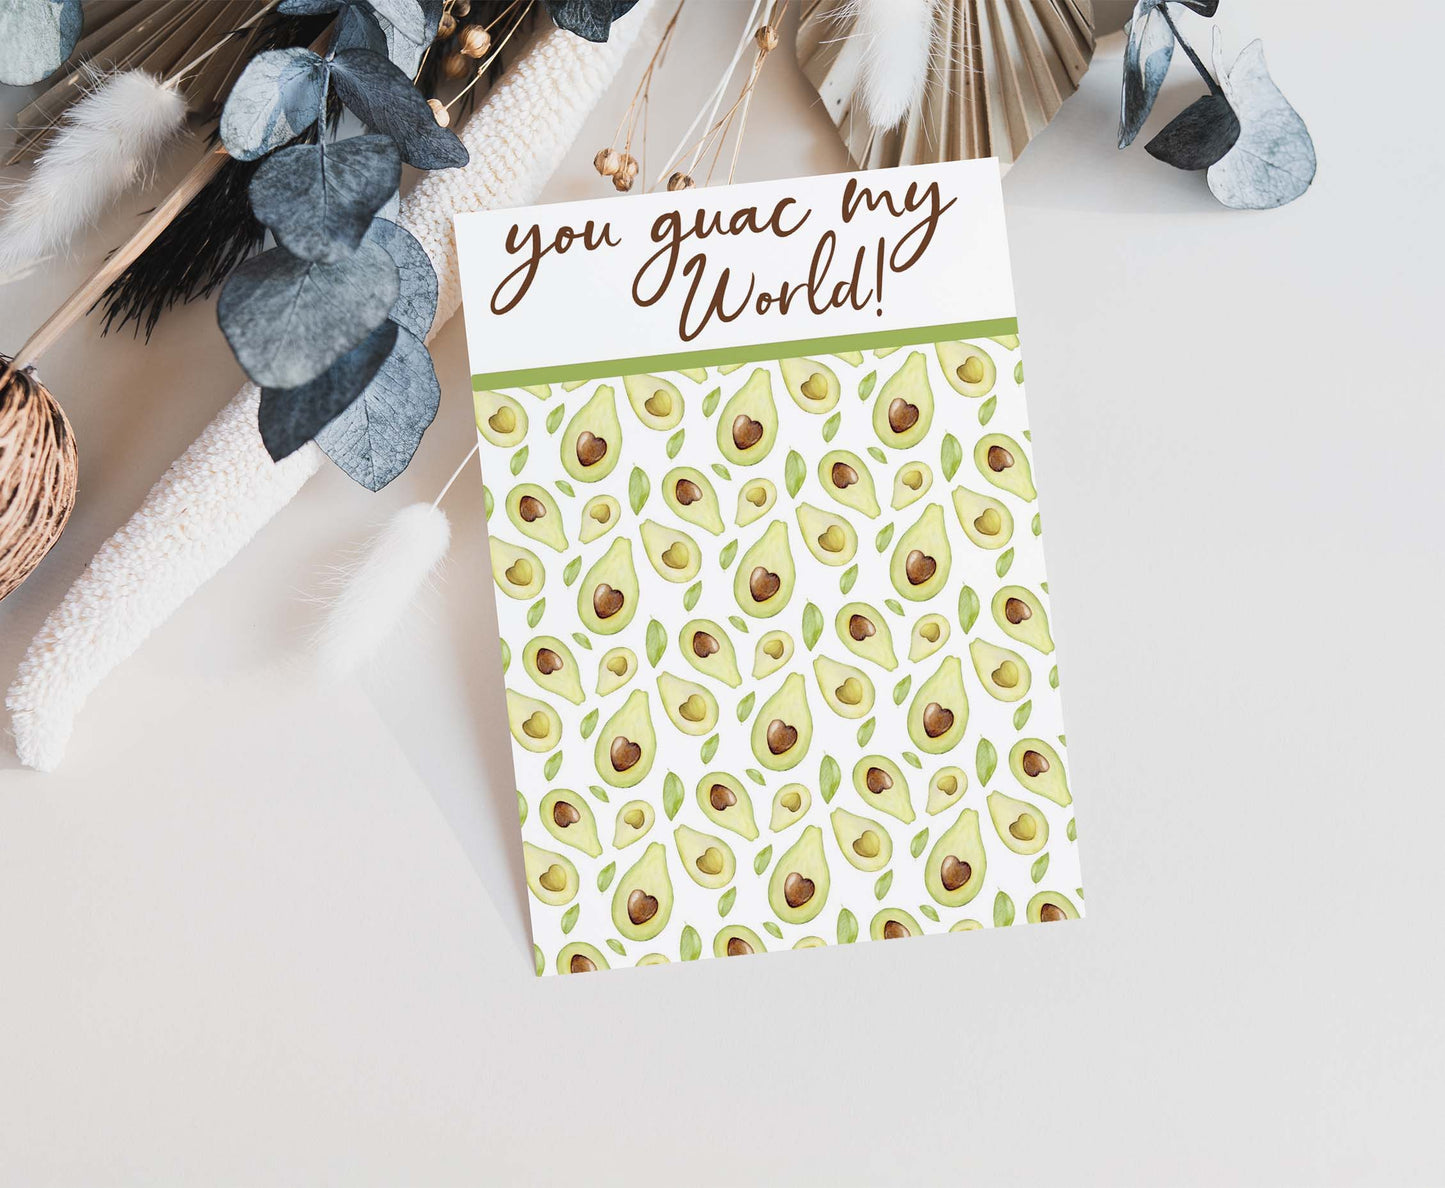 You Guac my World Cookie Card | Valentines Printable Cards - 119